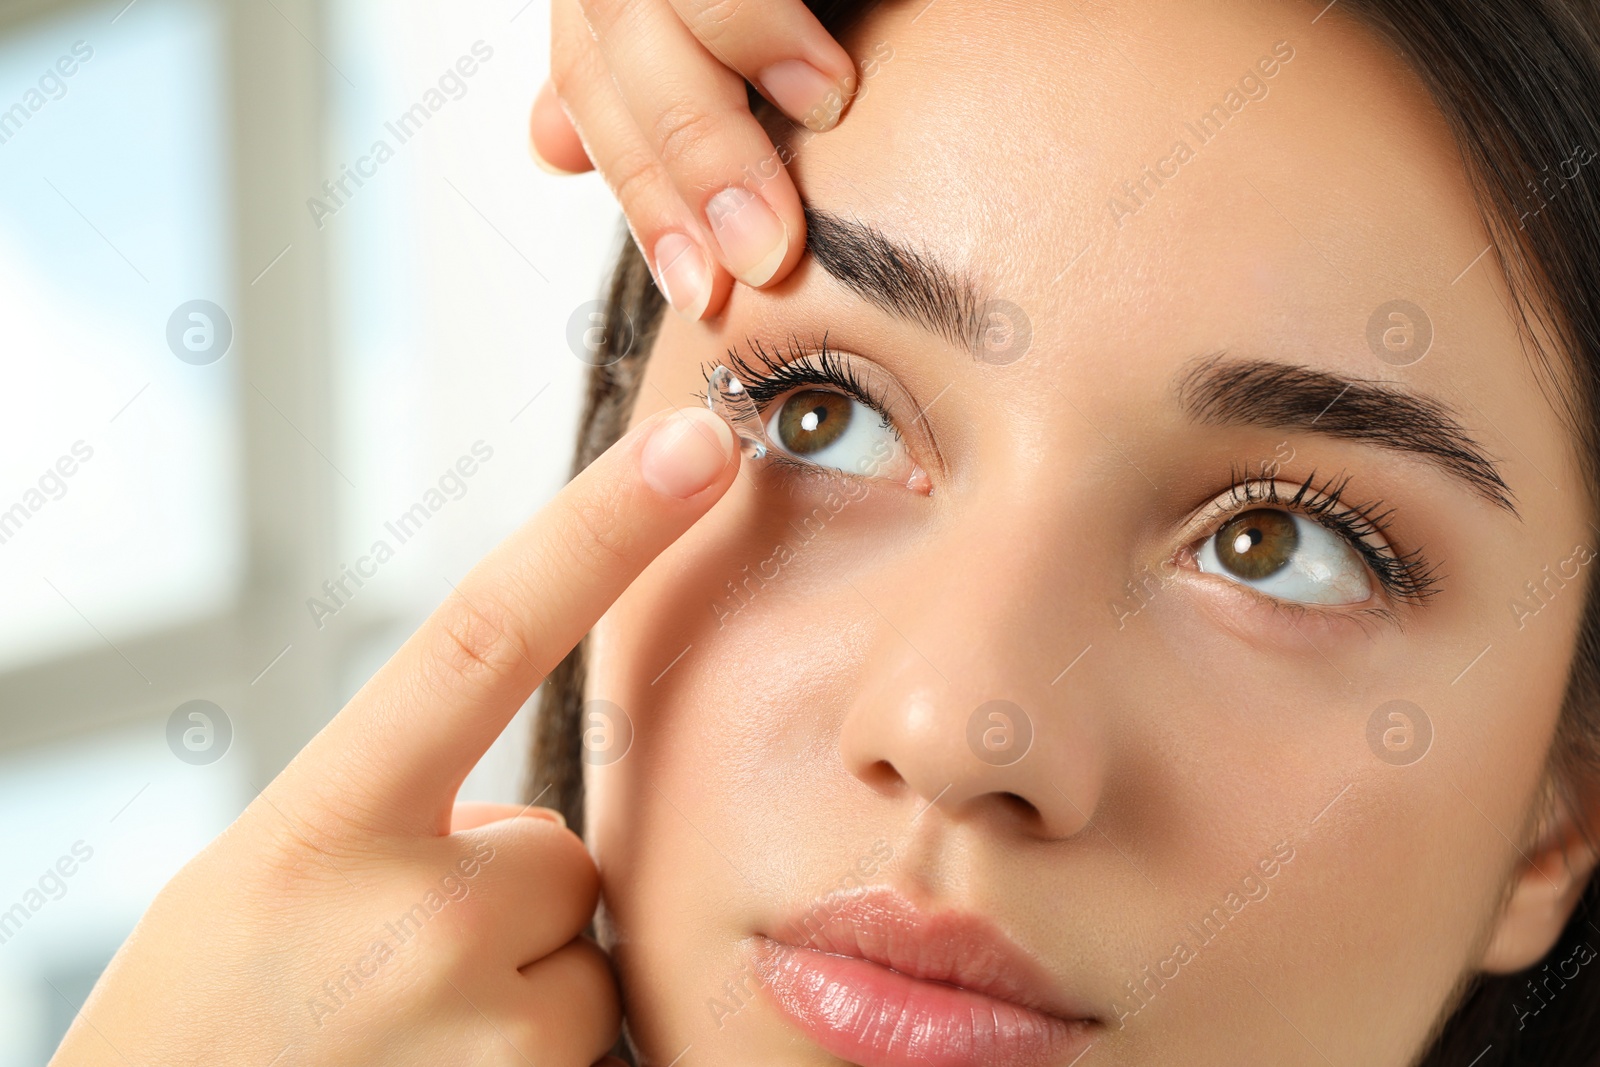 Photo of Woman putting contact lens in her eye indoors, closeup view